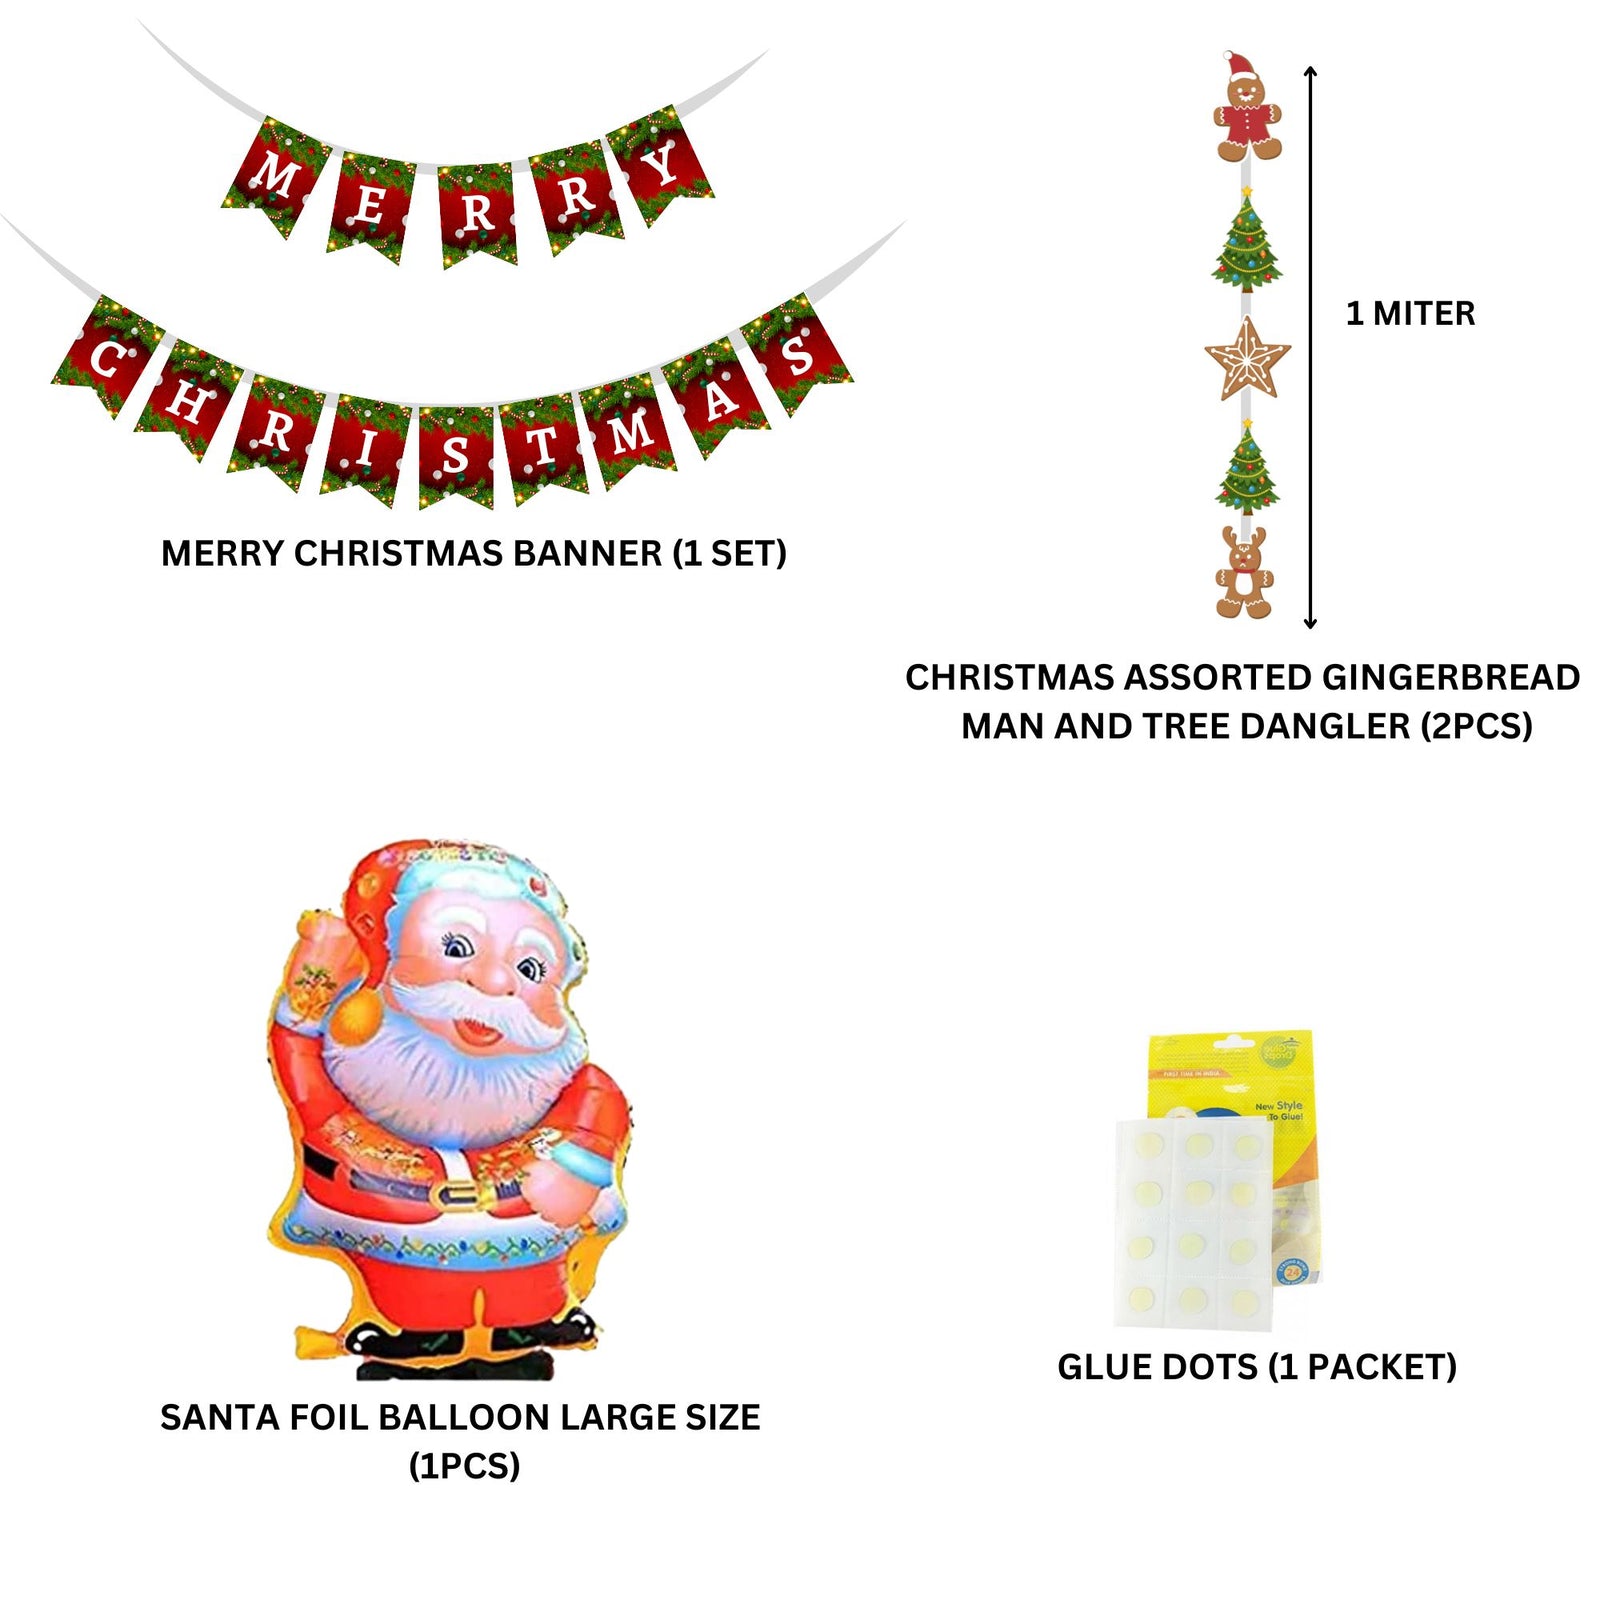 Merry Christmas Theme Decoration Kit (6 inches / 250 GSM Card Stock / Red, Green / 25 Pcs)